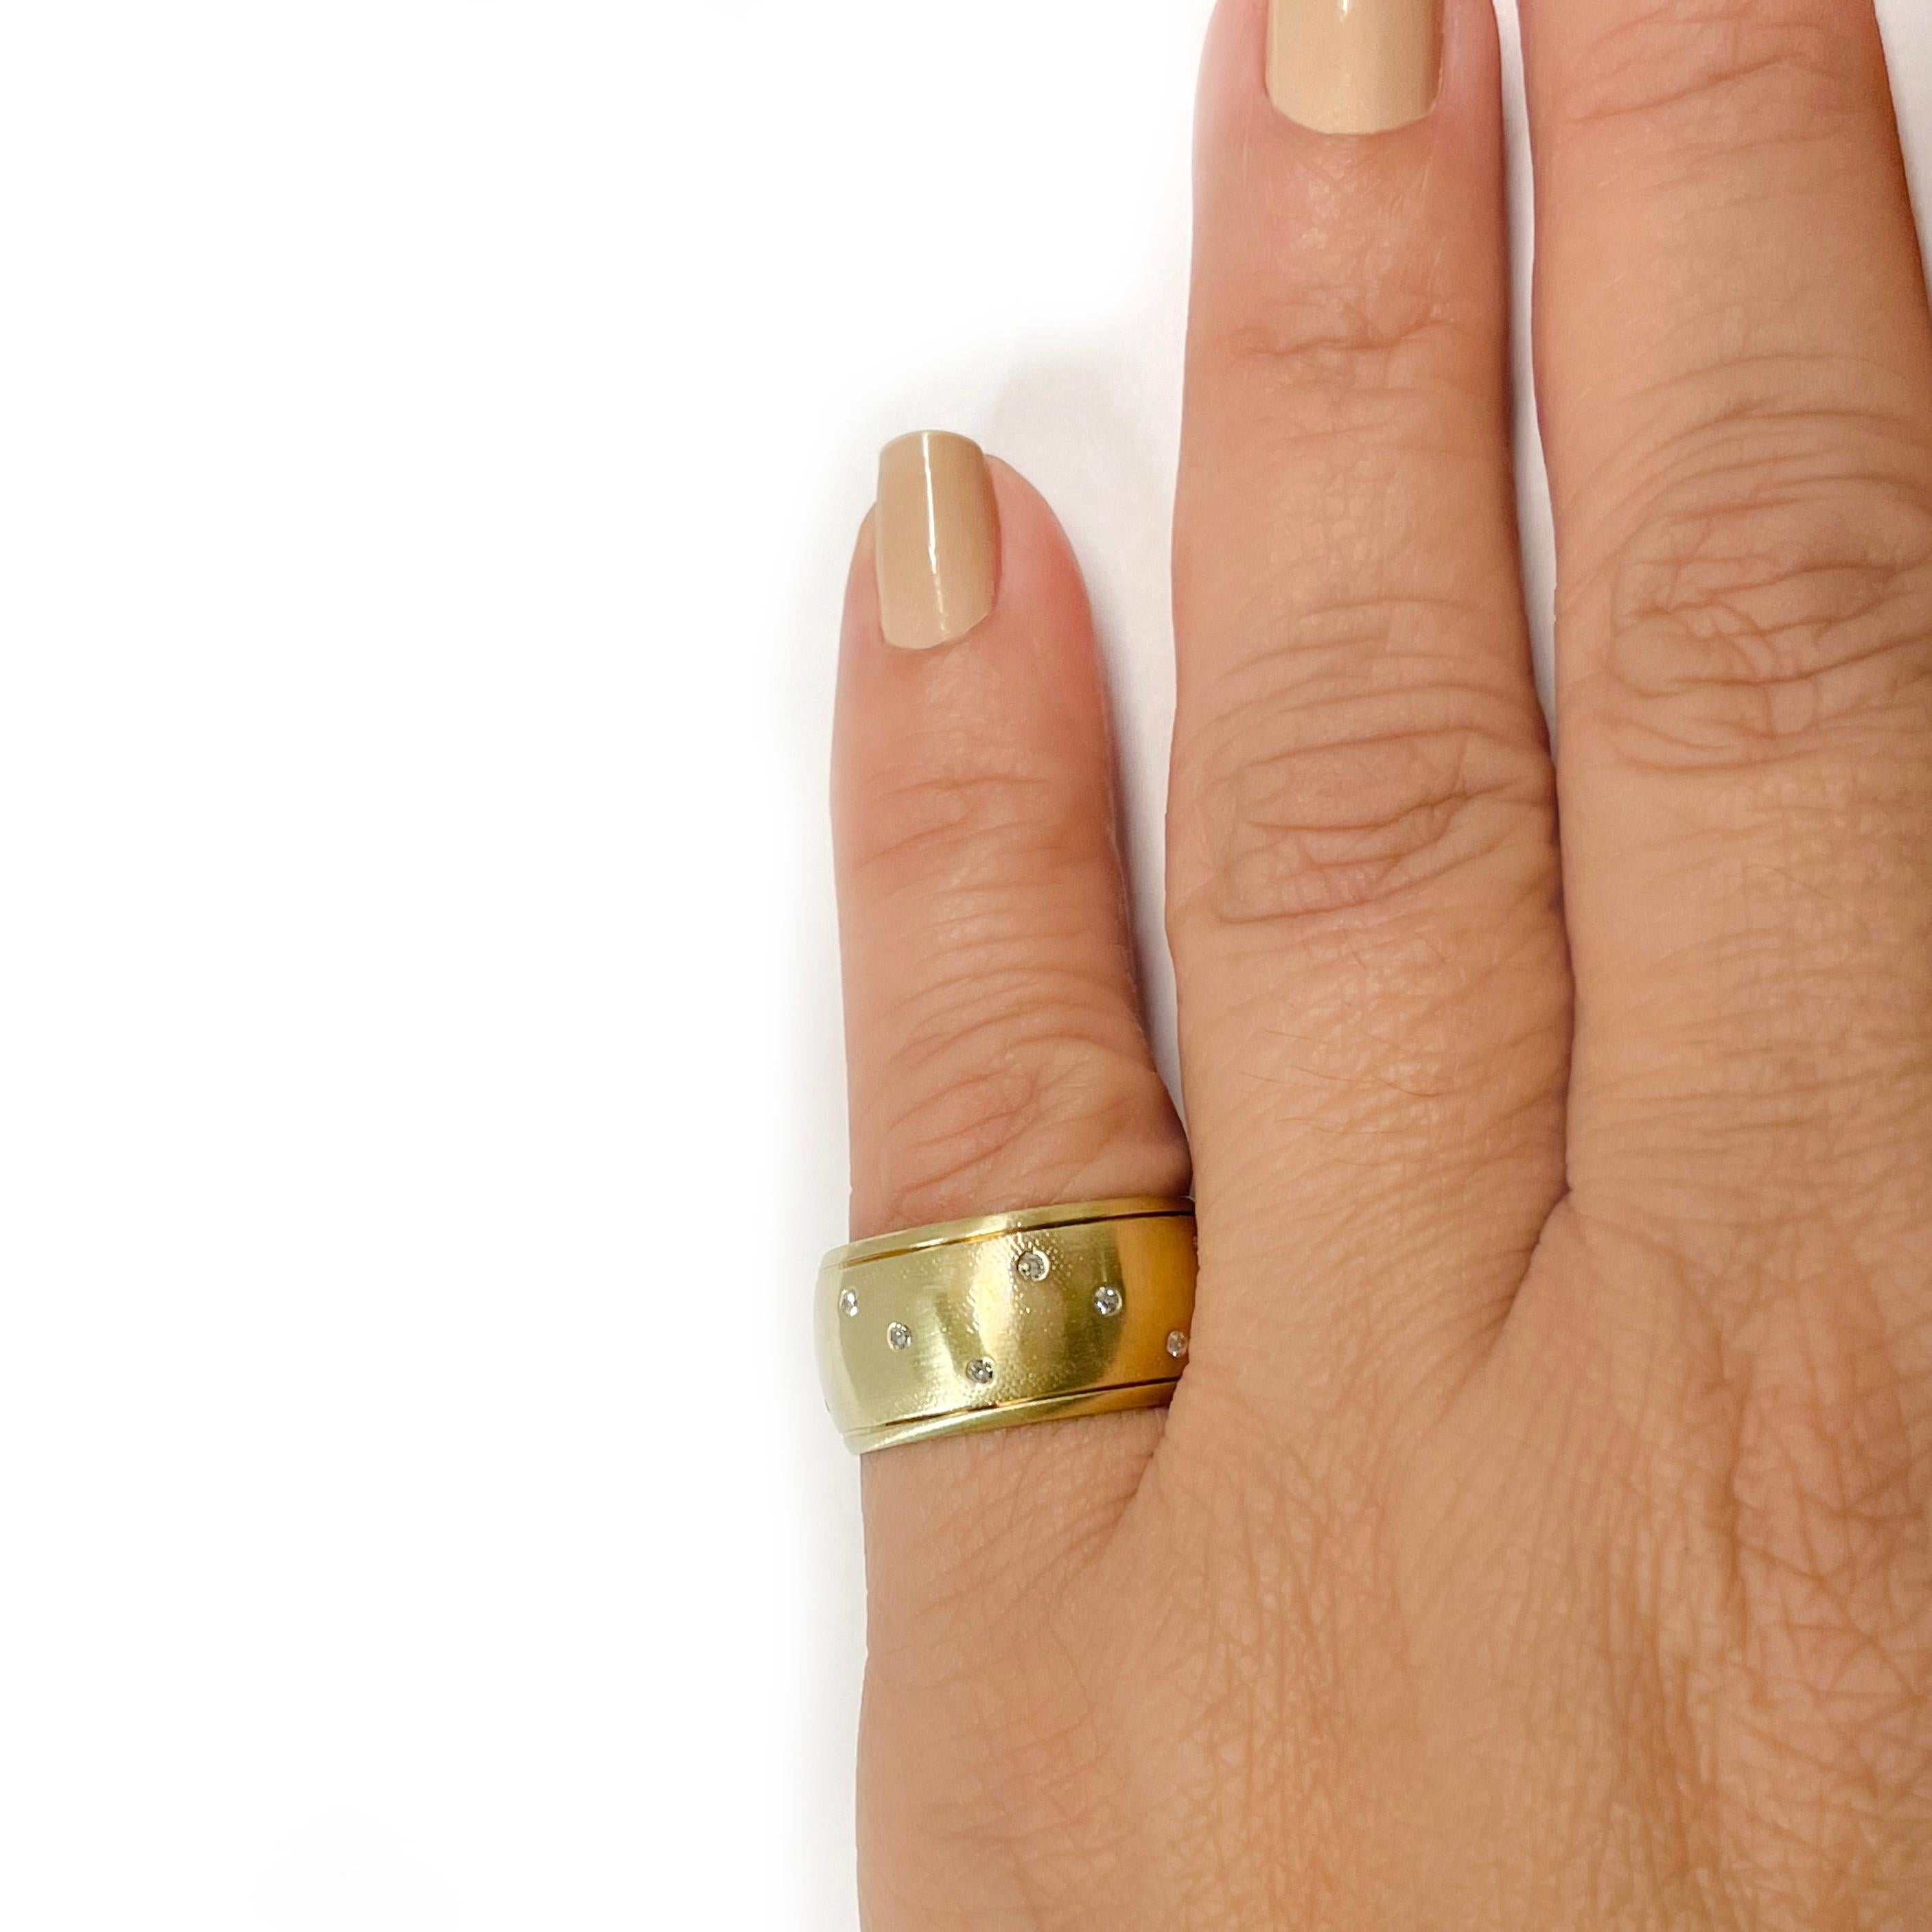 wide gold band with diamonds inset